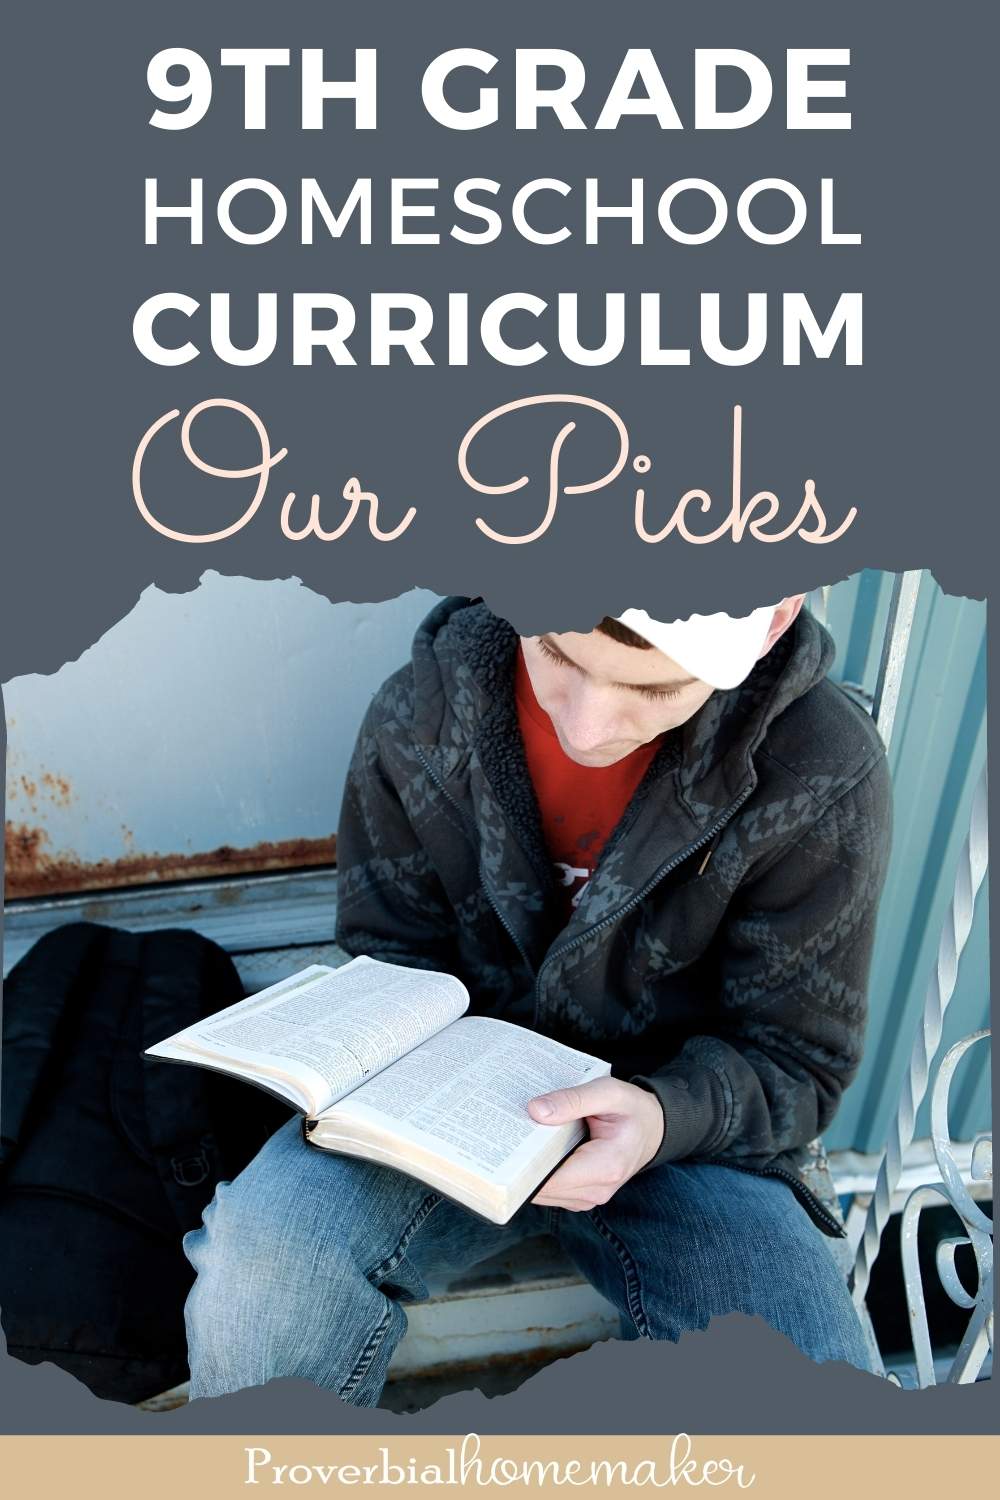 Student using Bible and 9th grade homeschool curriculum